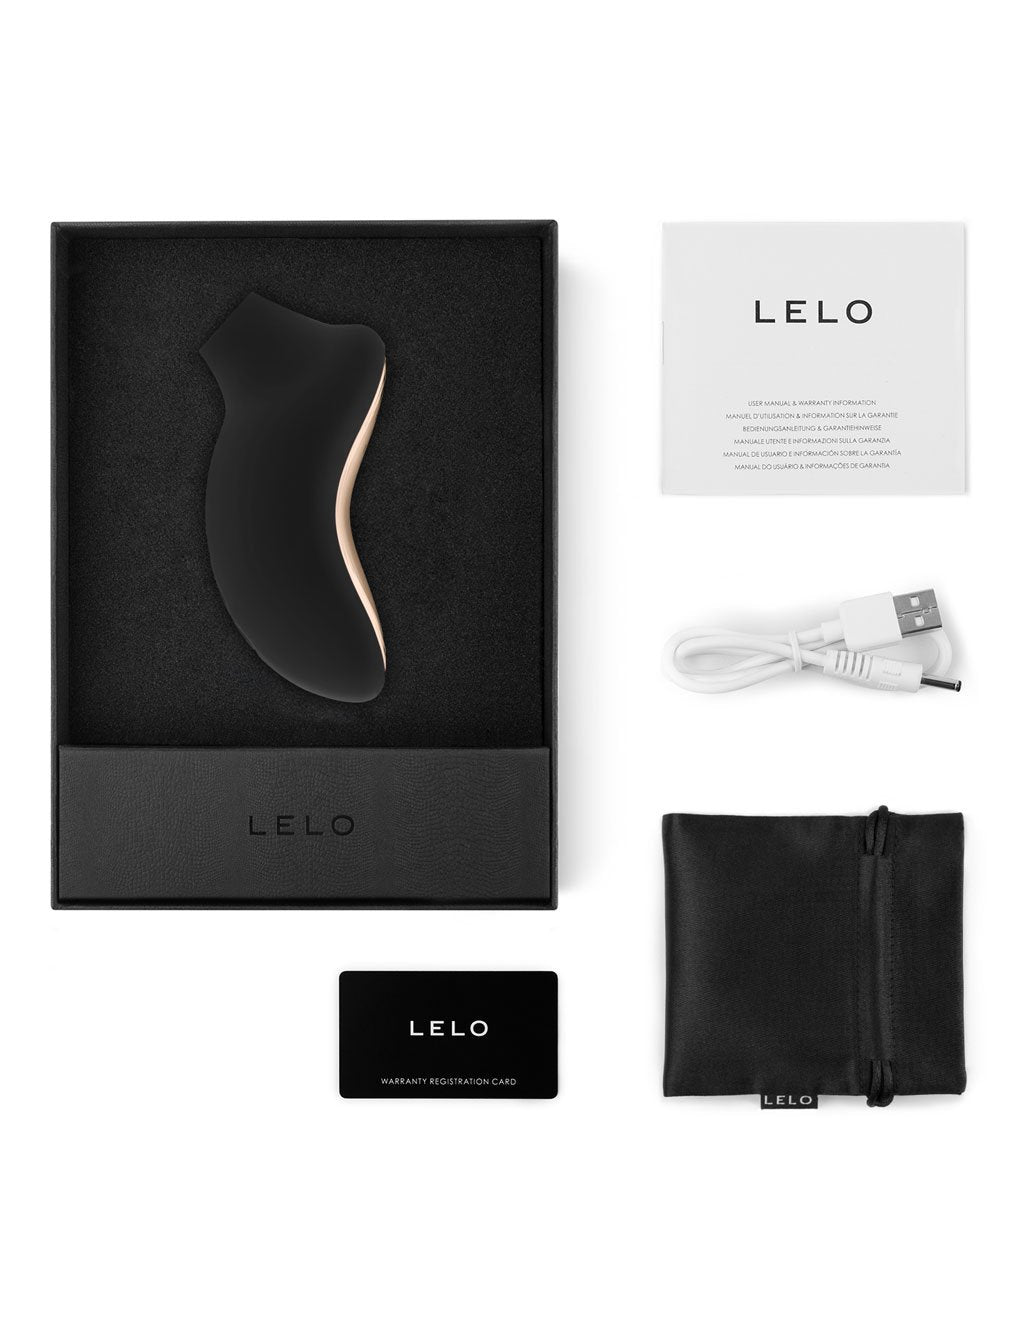 Lelo Sona 2 Sonic Clitoral Massager- Black- Contents